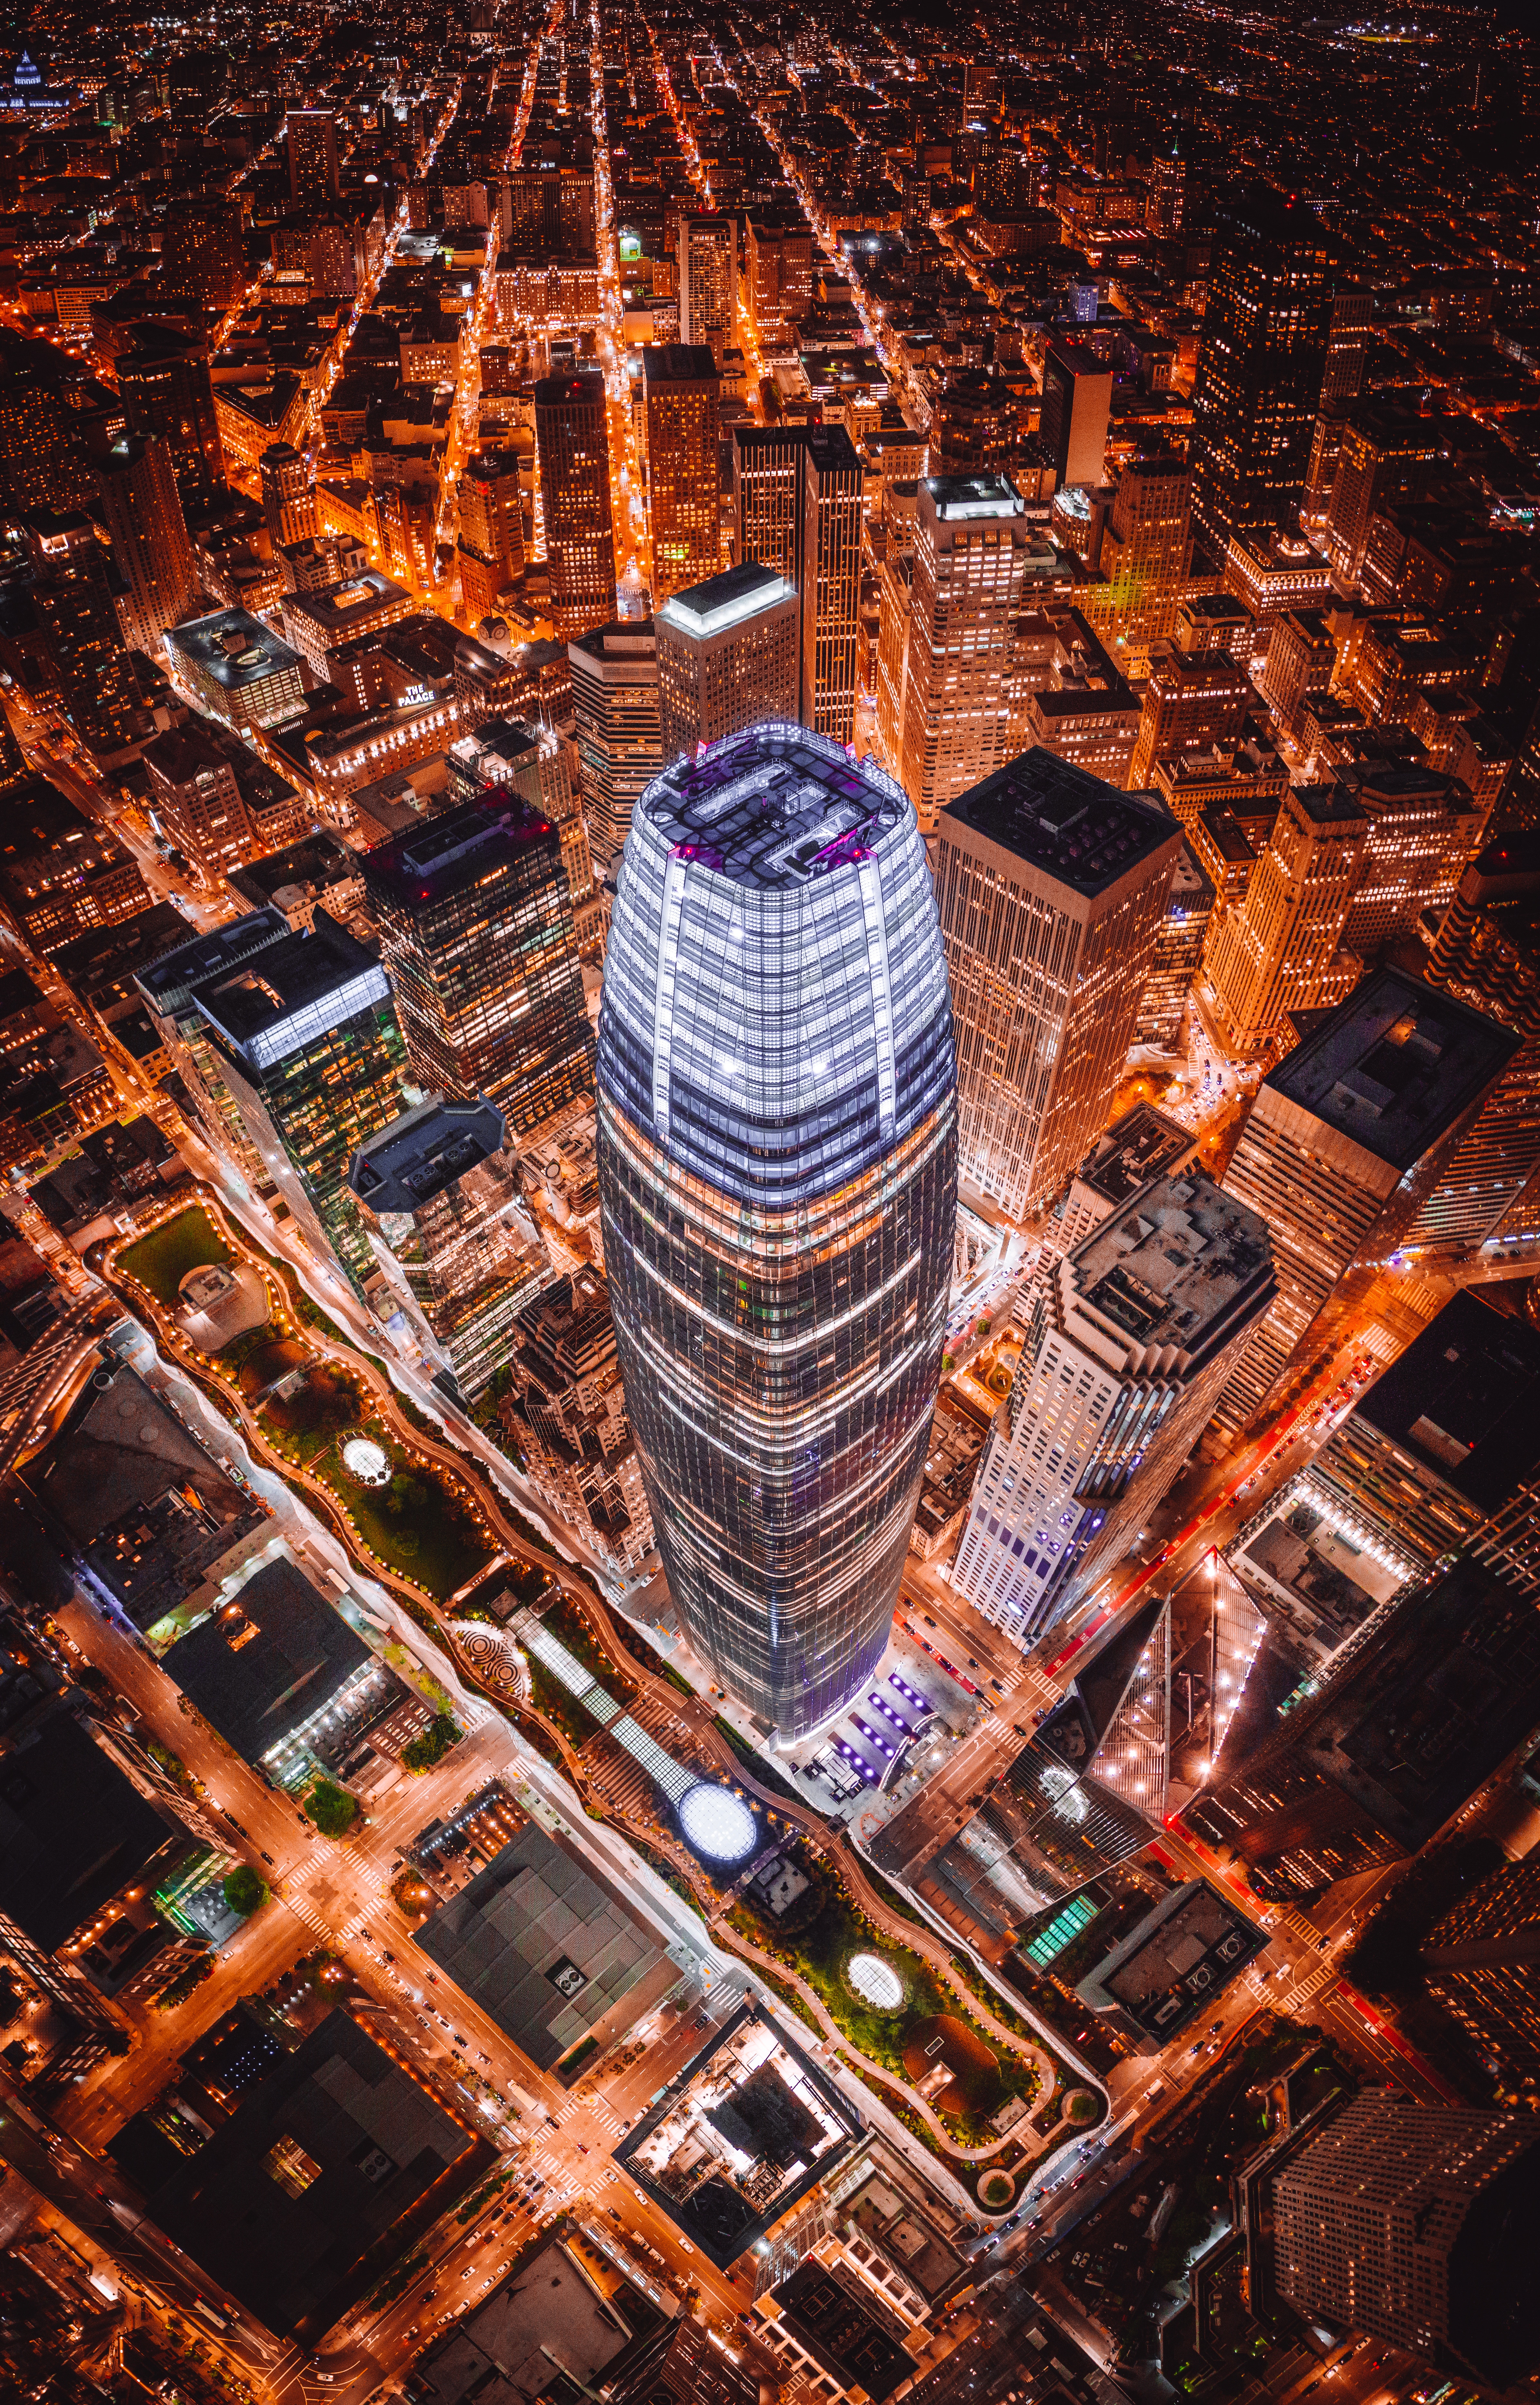 night city, roof, tower, cities, architecture, building, view from above, skyscrapers, roofs, towers phone background